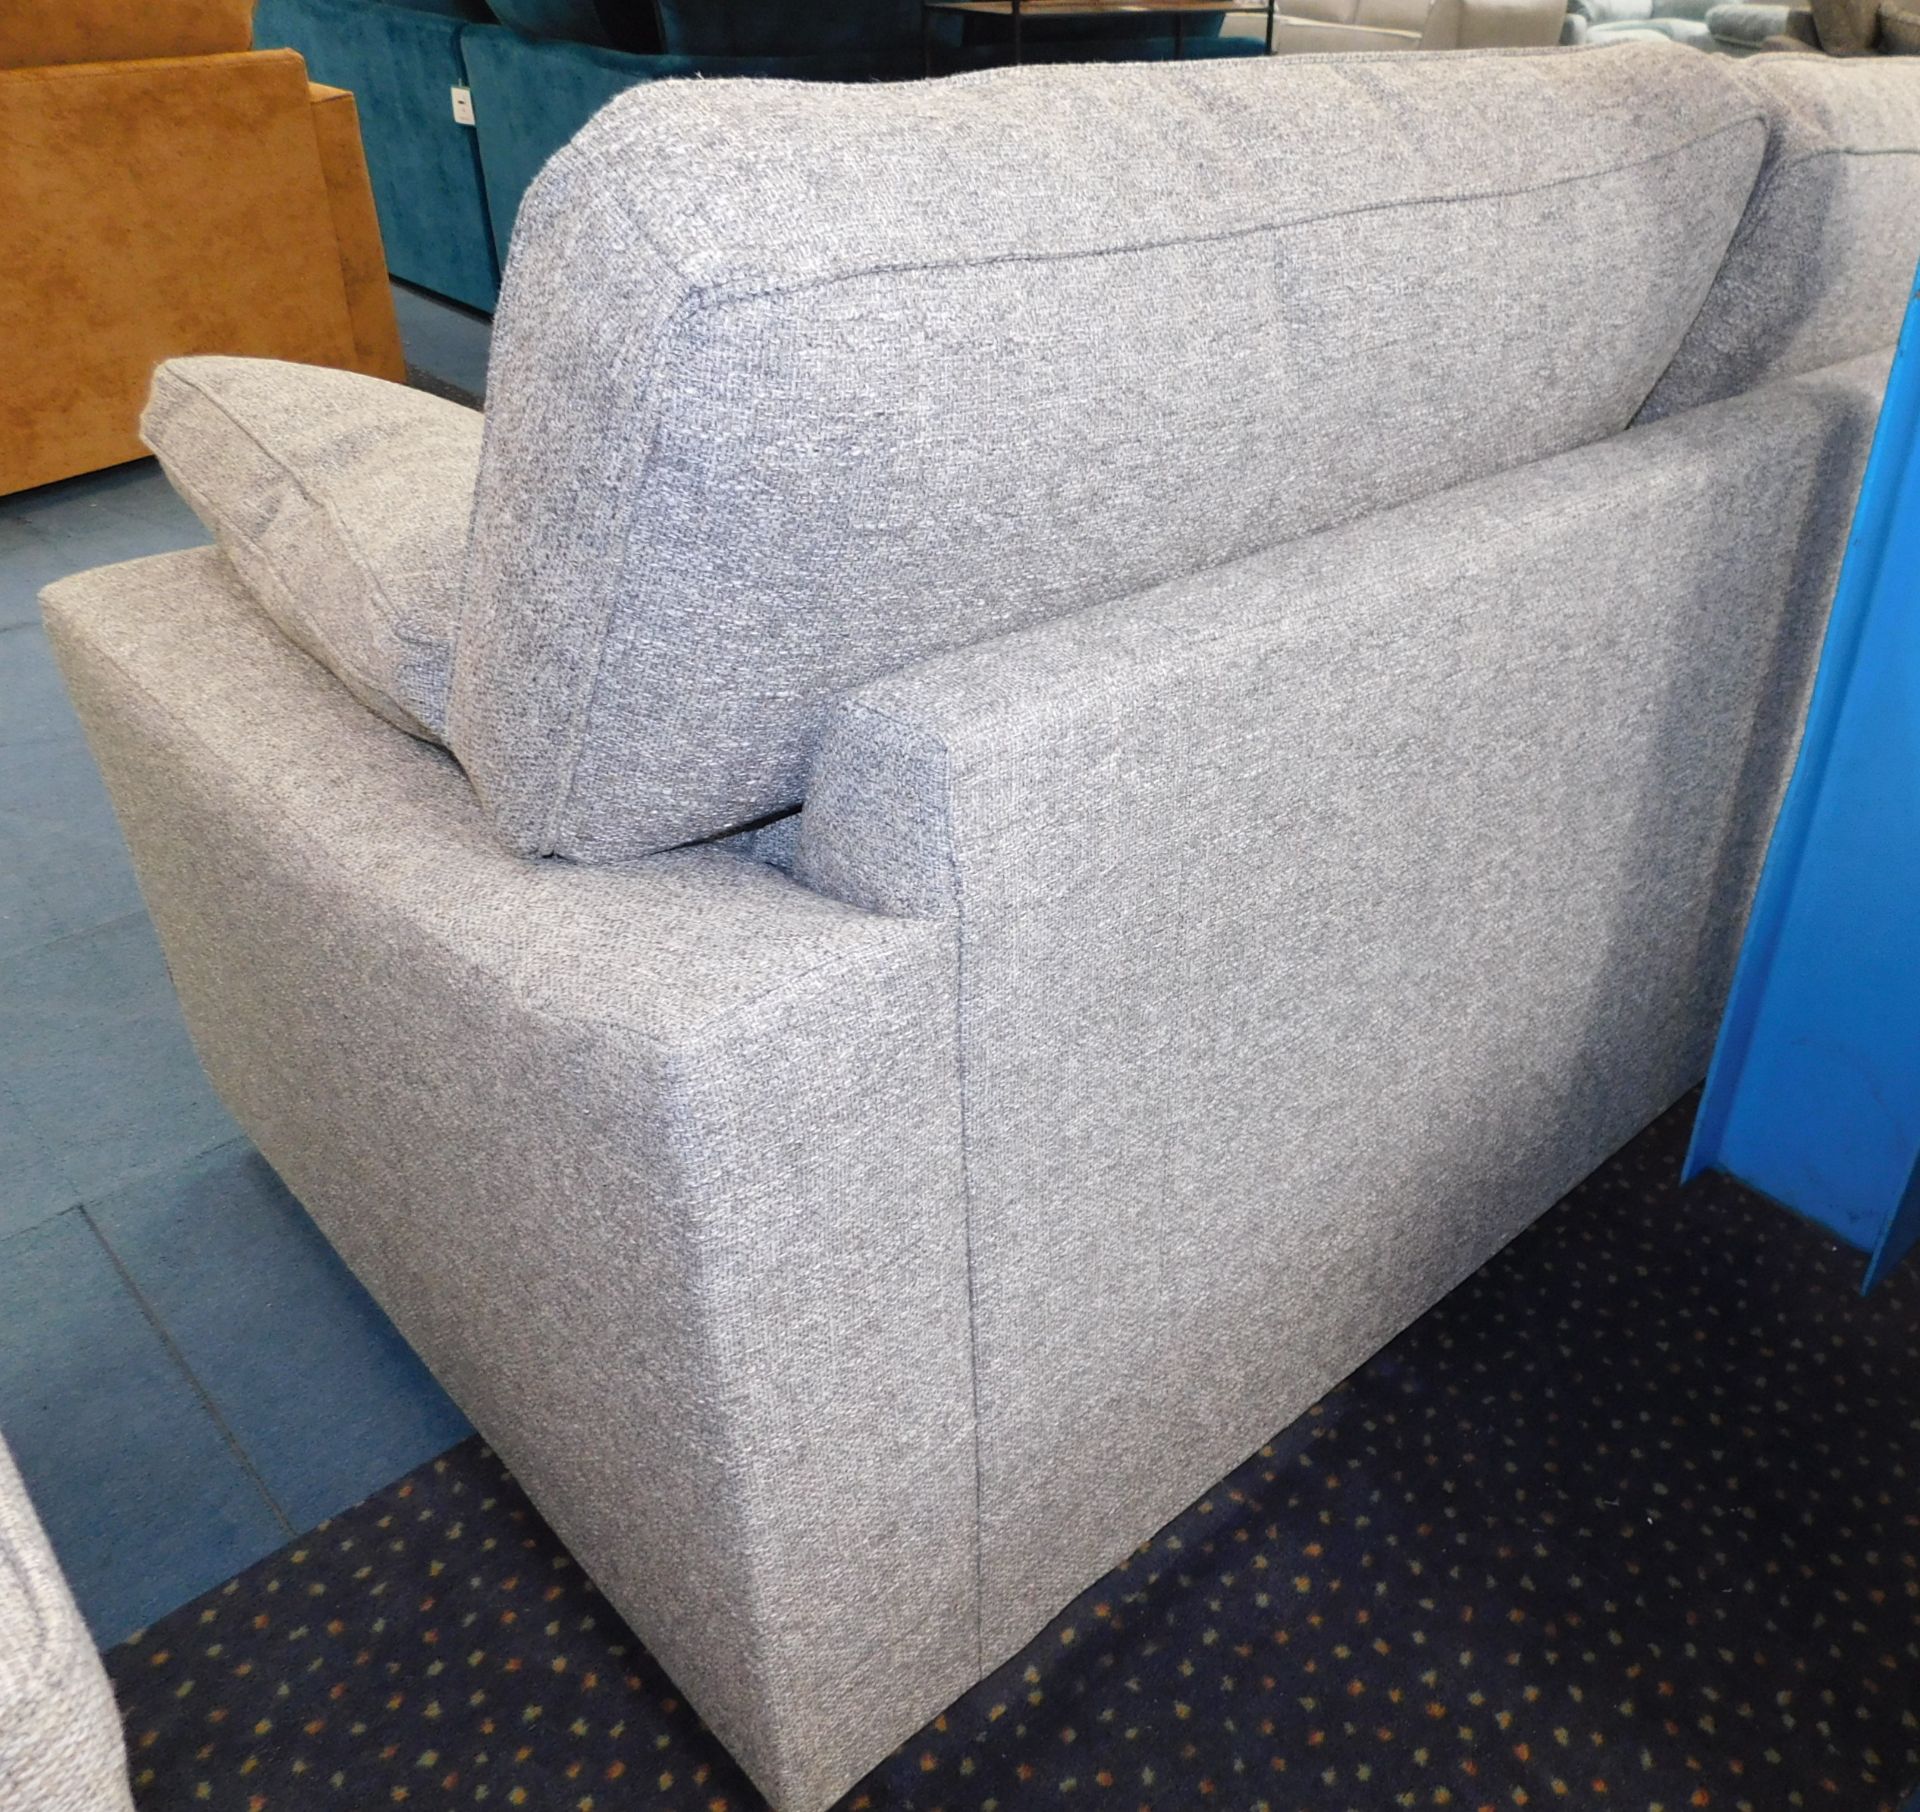 2-Seat Sofa (Location: Northampton. Please Refer to General Notes) - Image 3 of 4